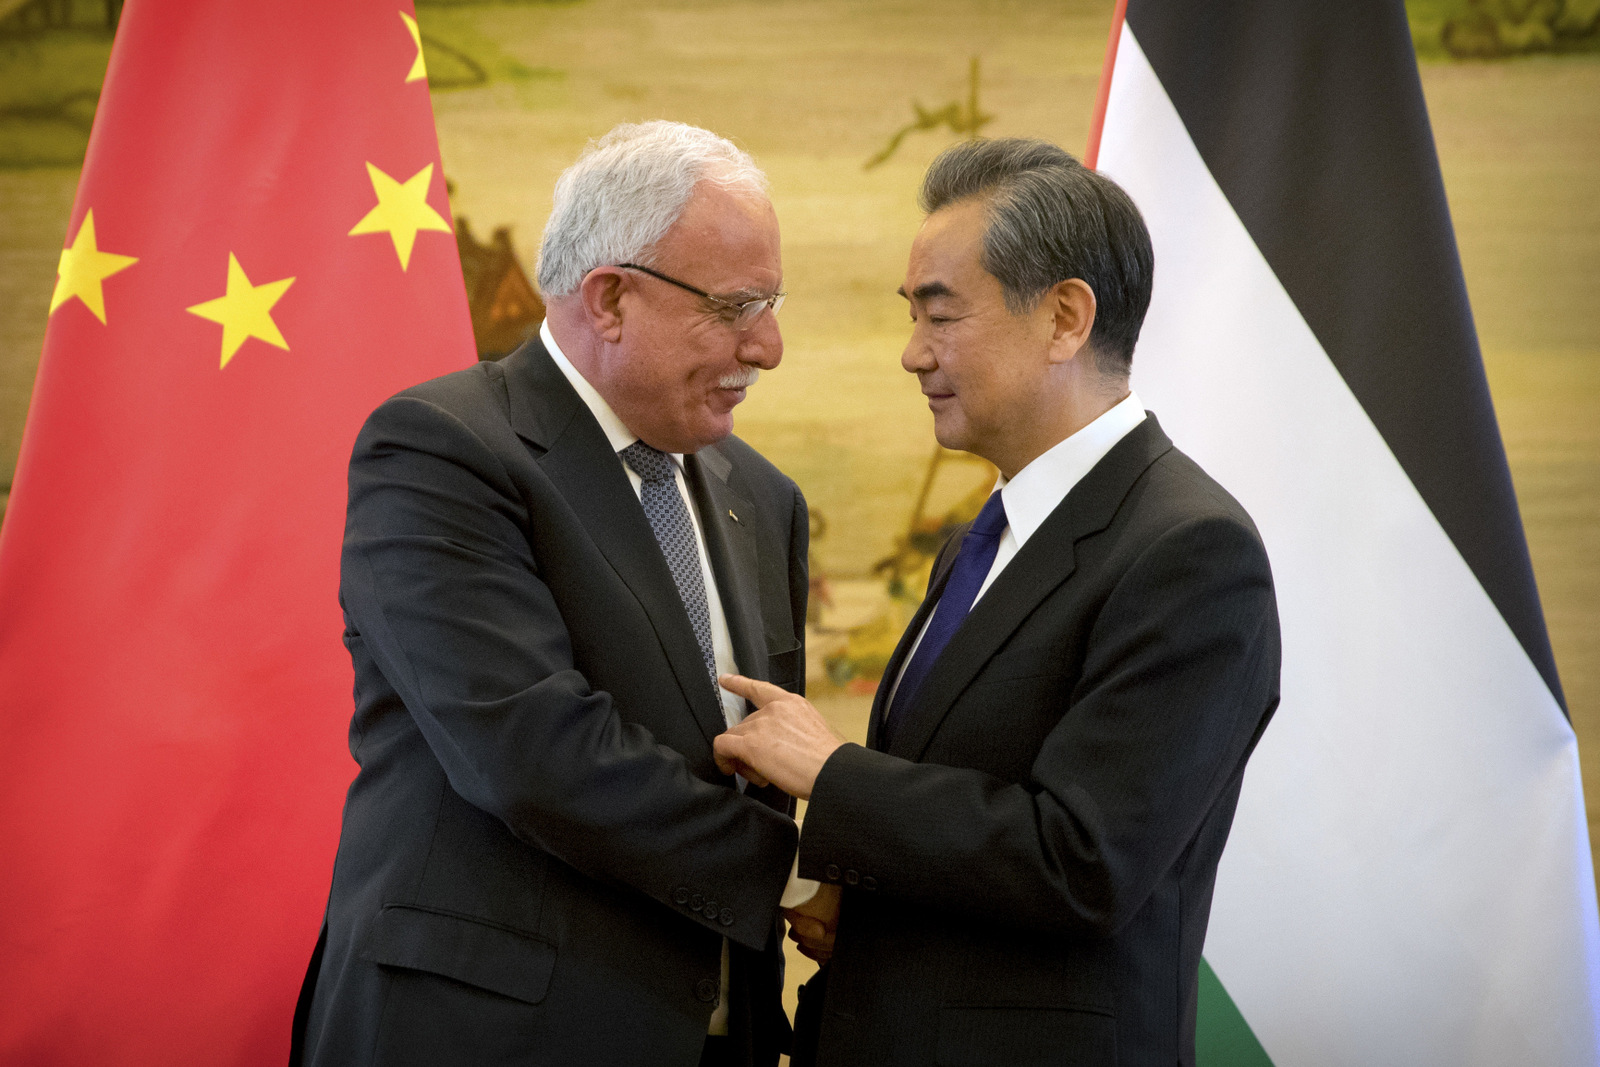 Palestinian Foreign Minister Riyad Al-Maliki, left, and Chinese Foreign Minister Wang Yi shake hands at the end of their joint press conference at the Ministry of Foreign Affairs in Beijing, Thursday, April 13, 2017. (AP/Mark Schiefelbein)